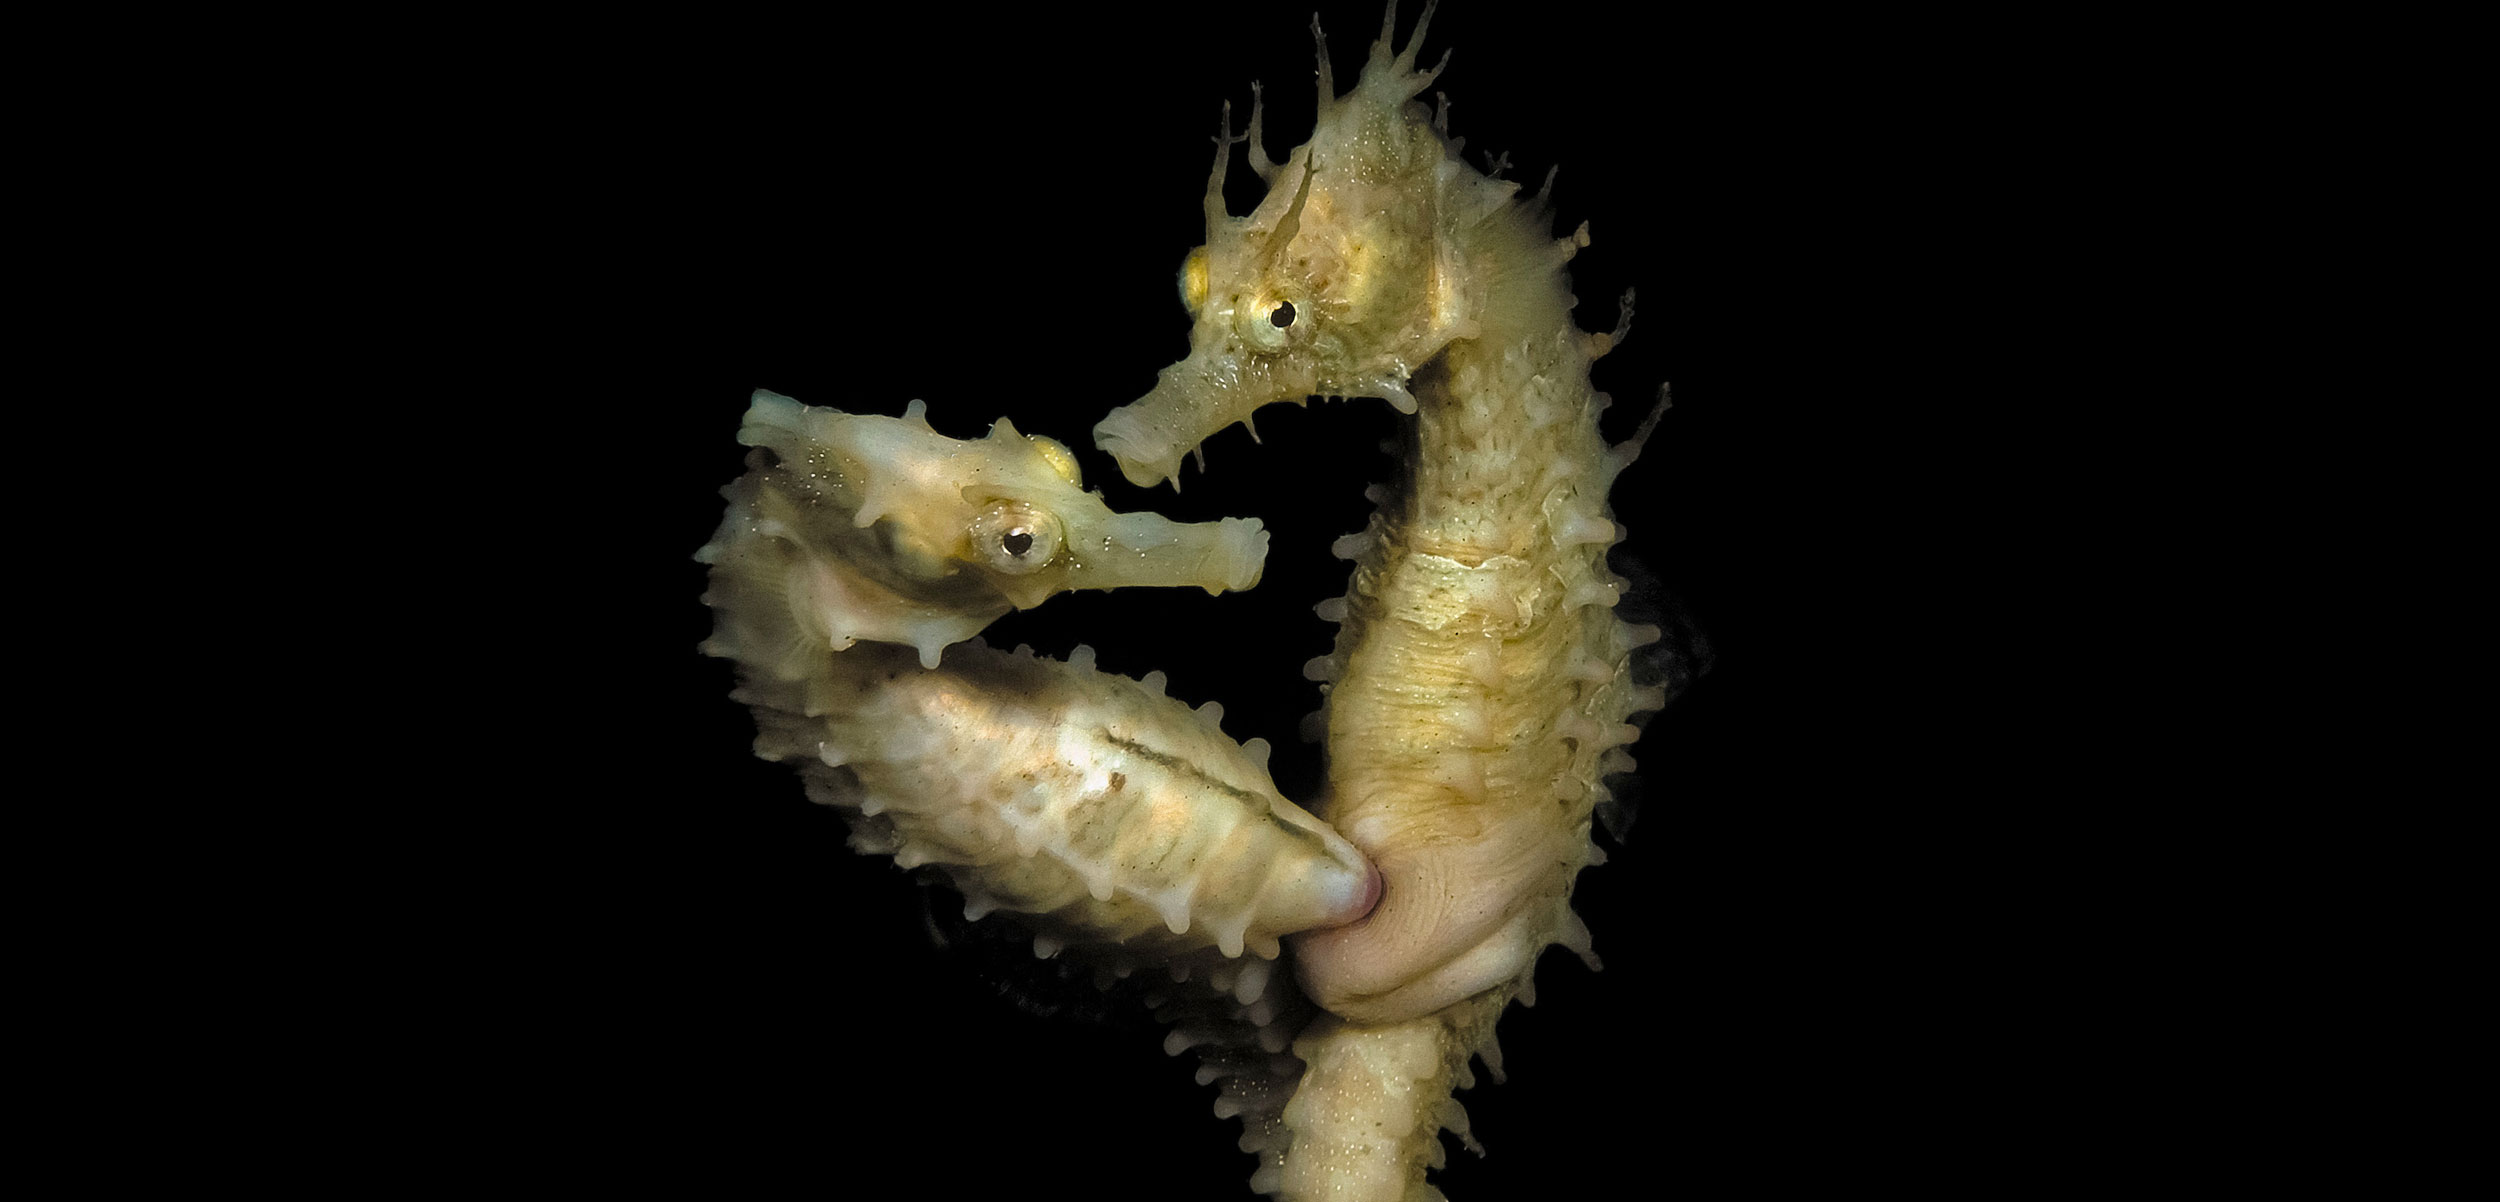 pair of lined seahorses mating